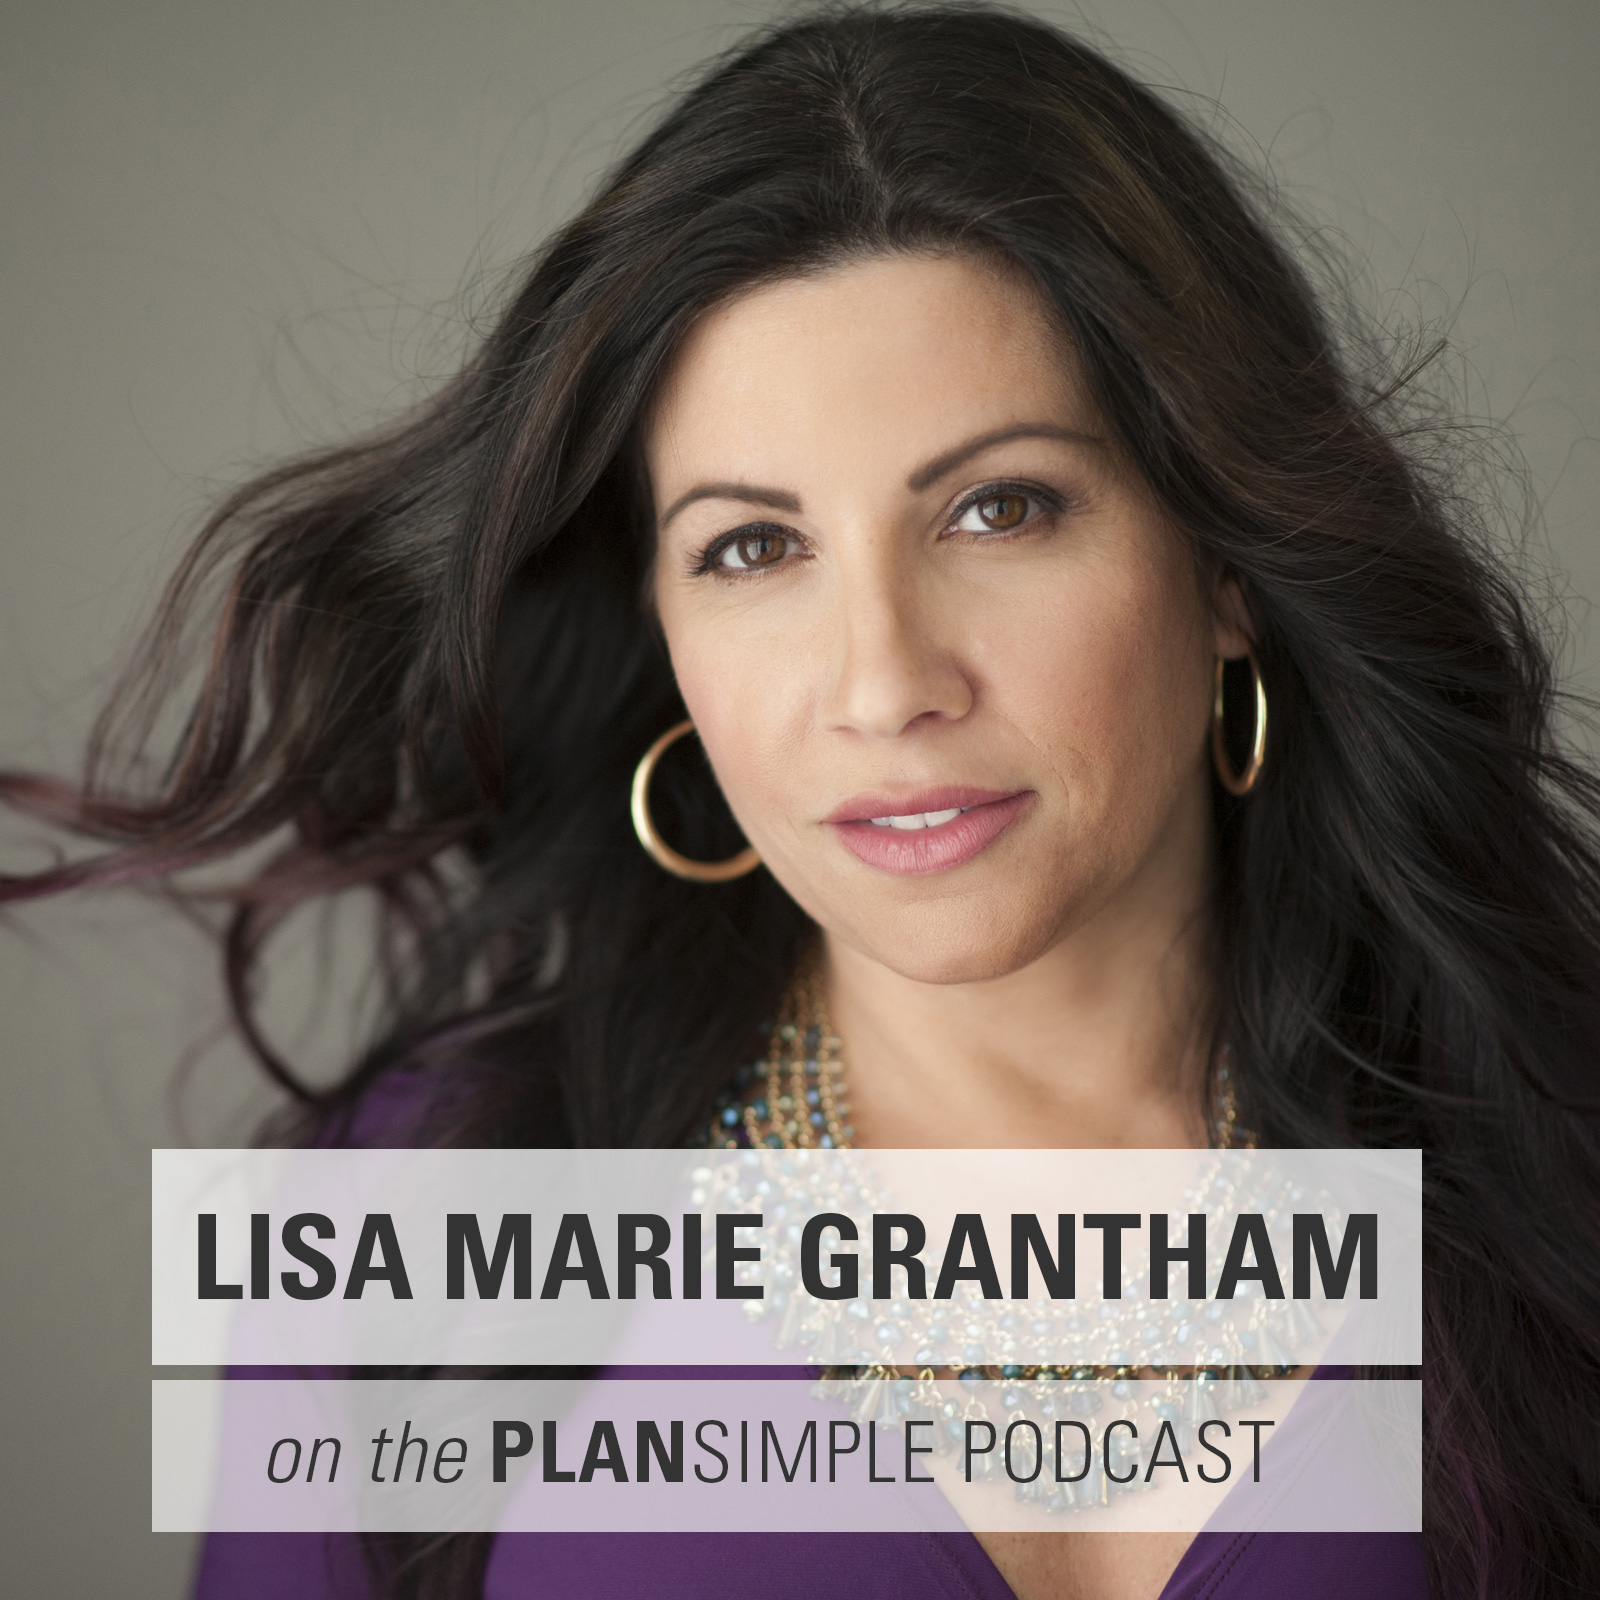 A Magical Life with Lisa Marie Grantham